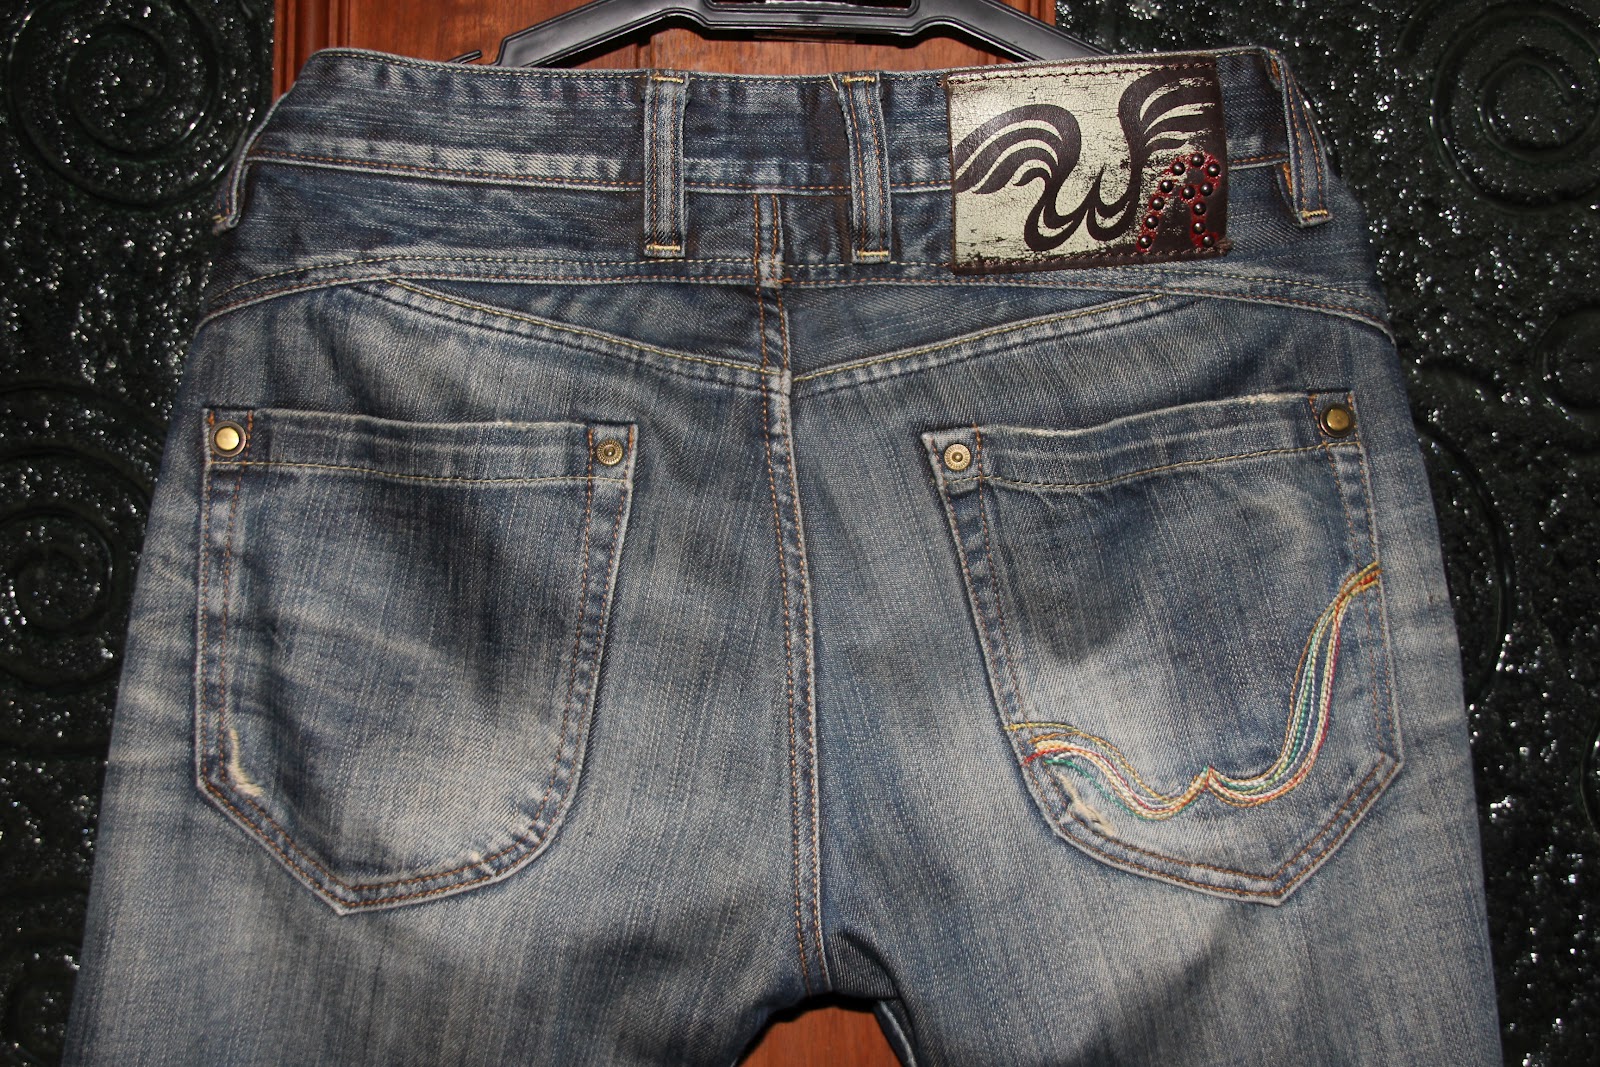 Hipster Closet: We Are Replay Jeans - RM400